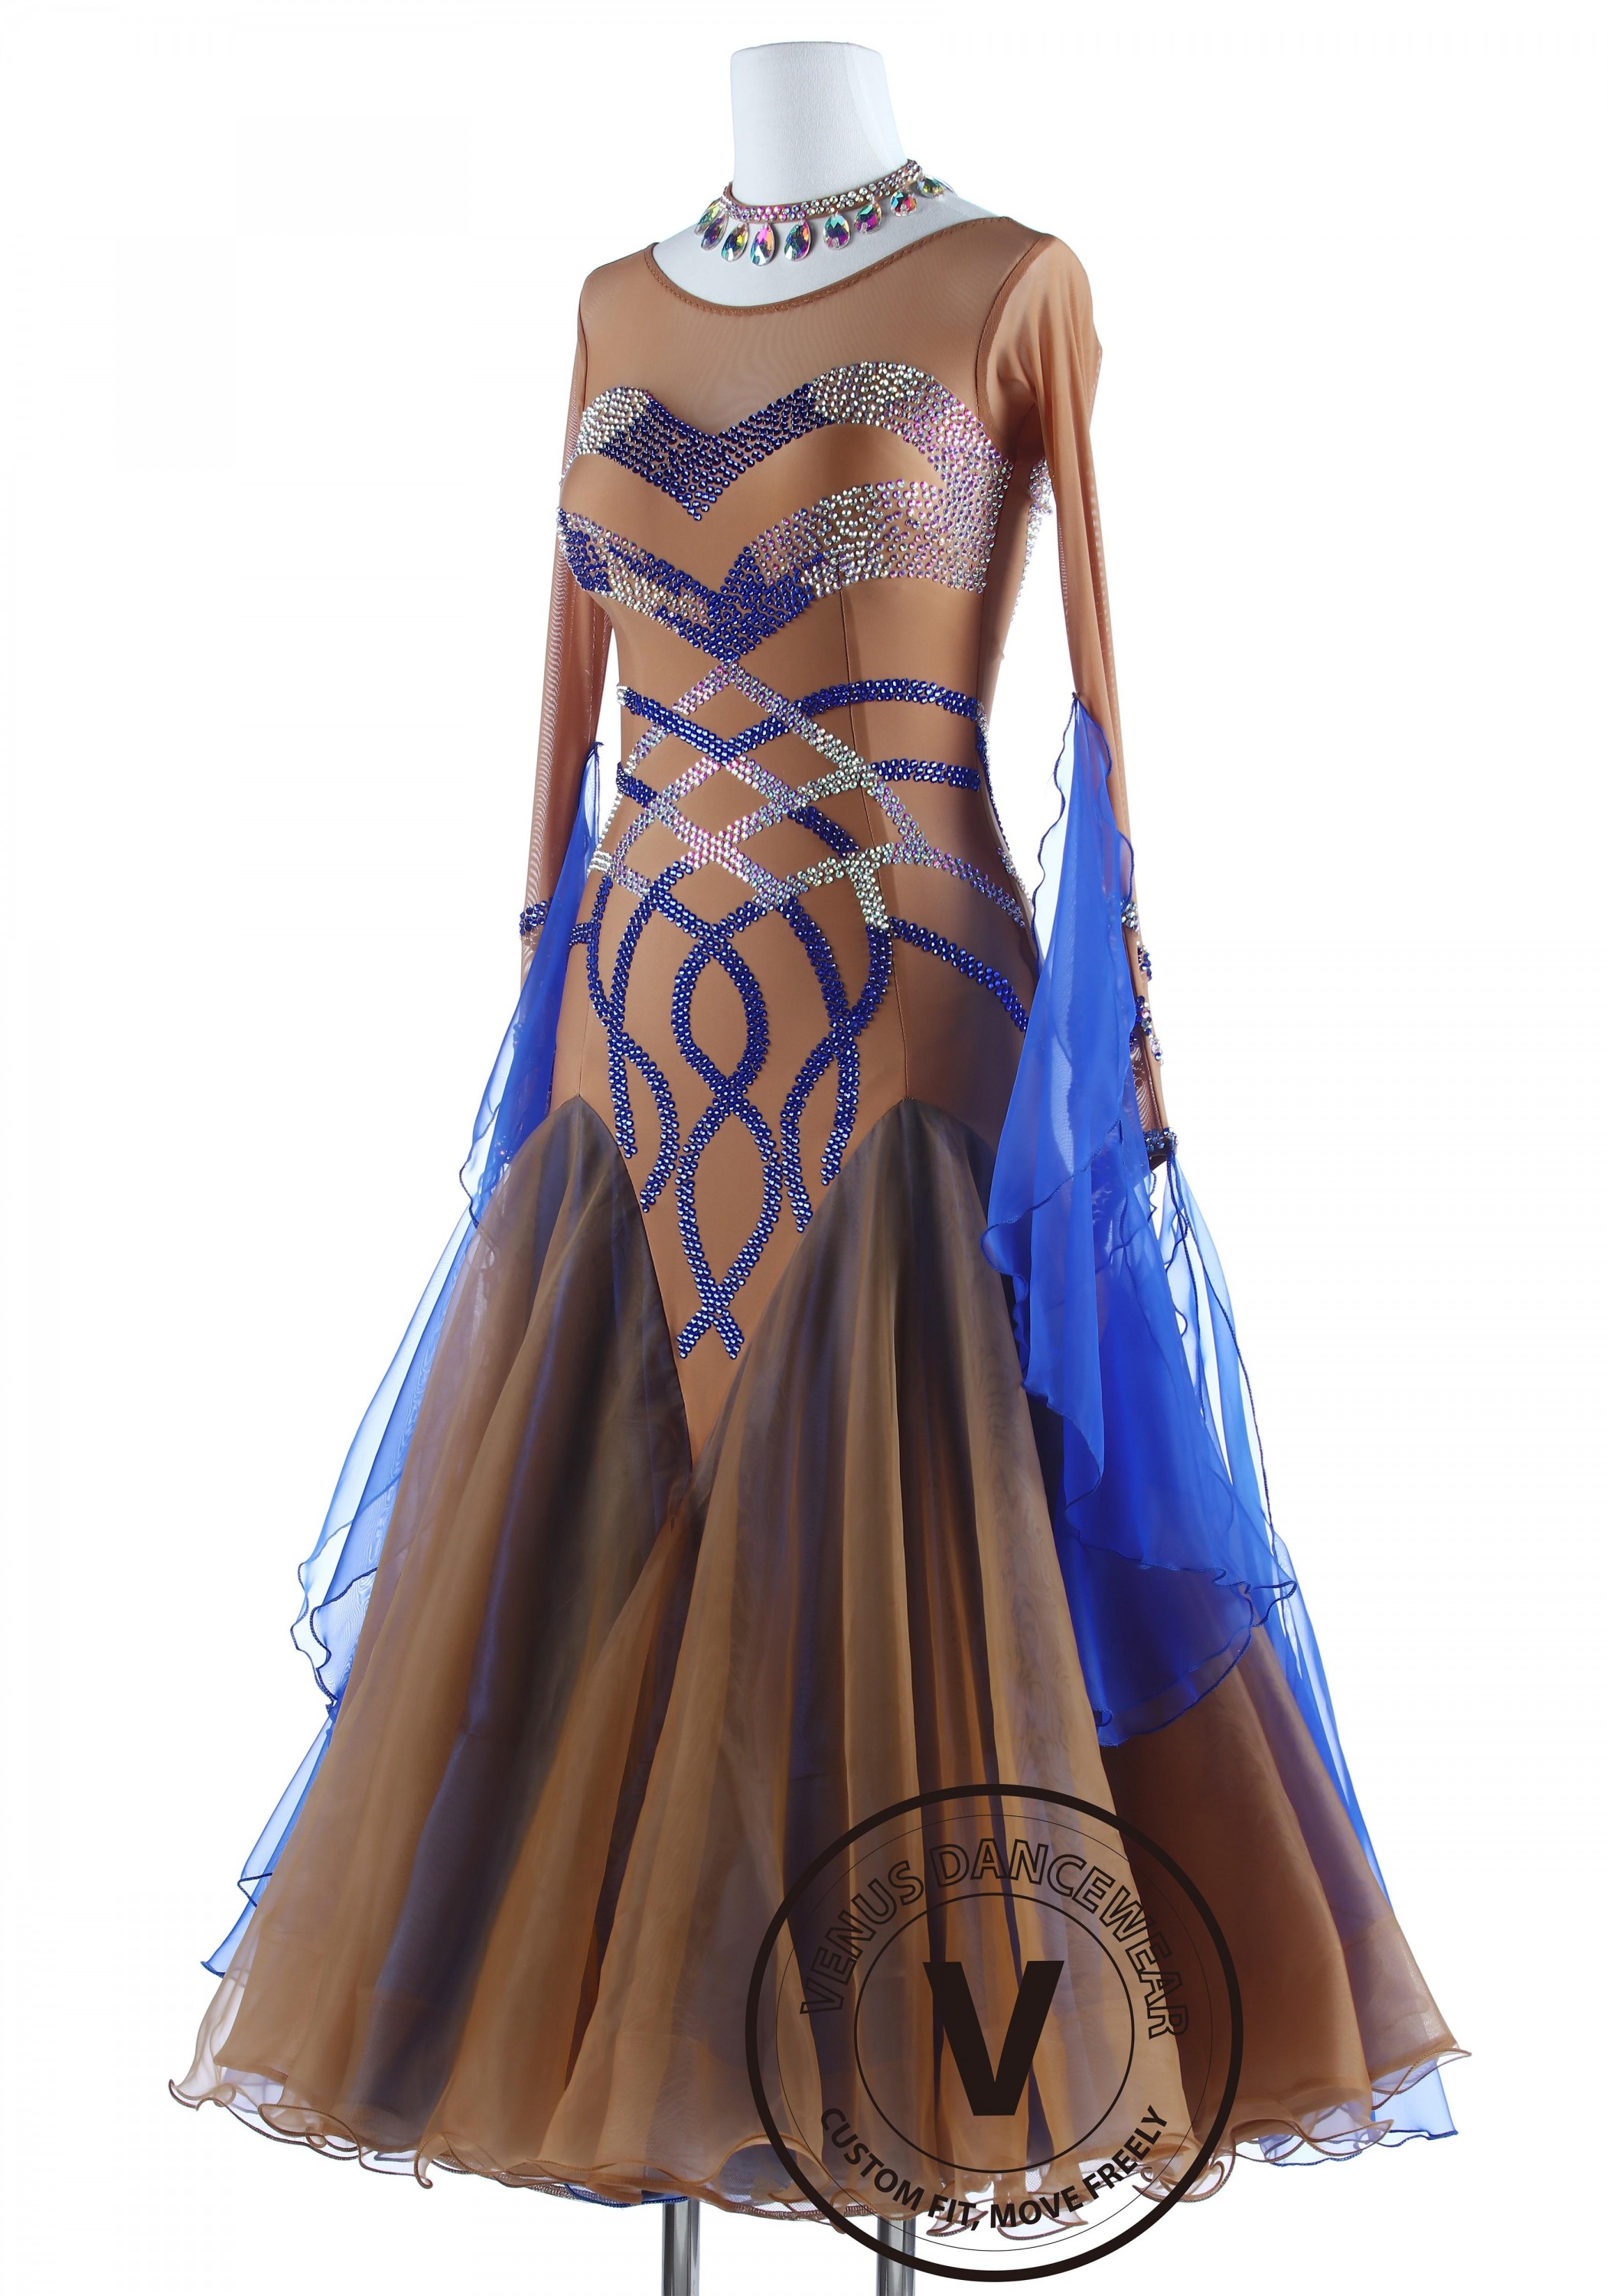 Caramel with Royal Blue Luxury Foxtrot Waltz Quickstep Competition